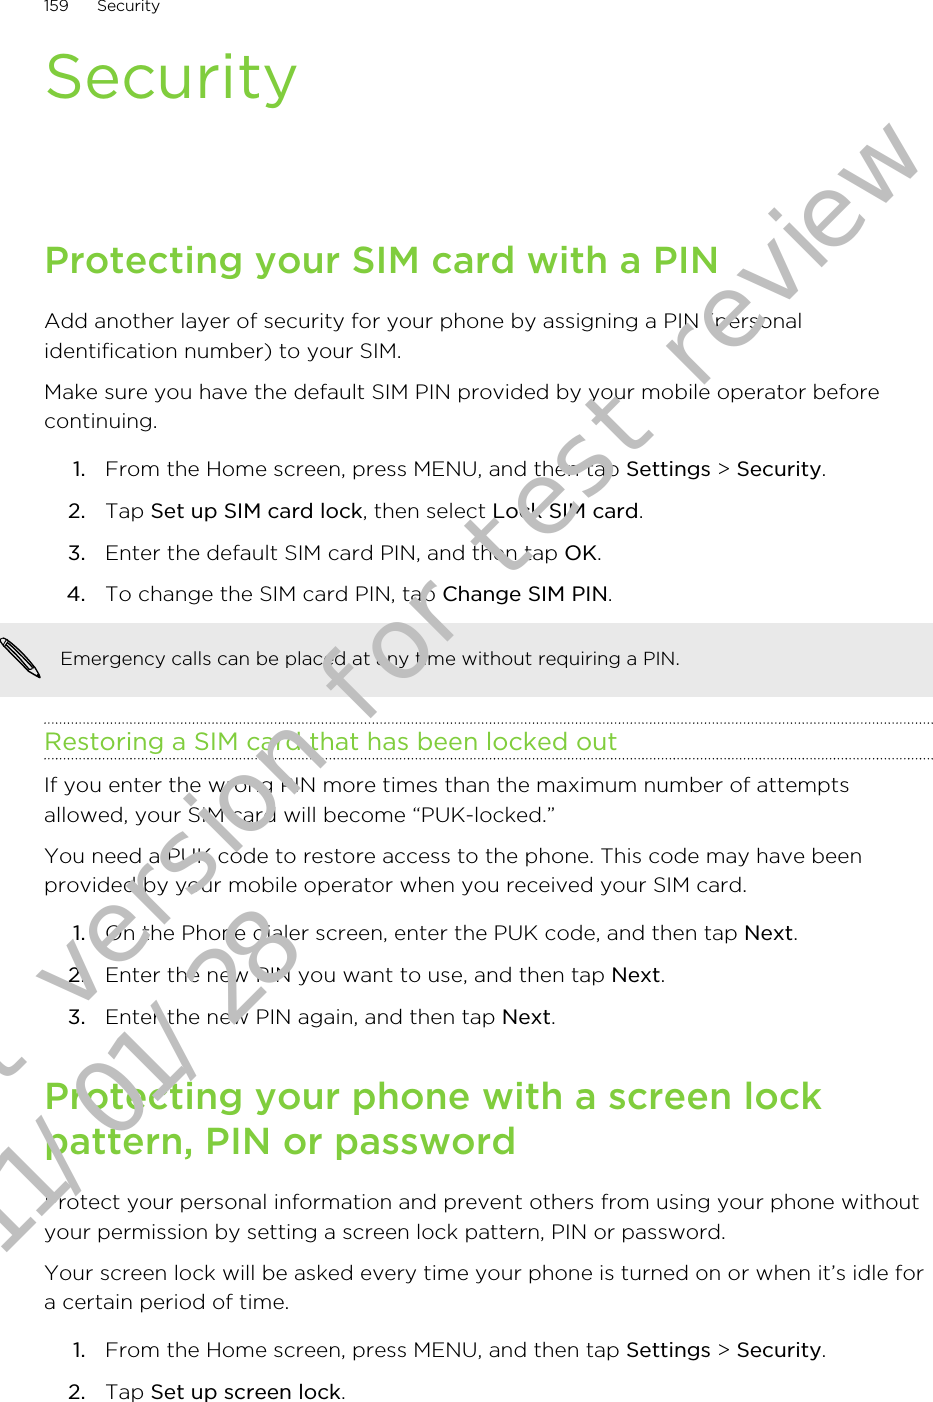 SecurityProtecting your SIM card with a PINAdd another layer of security for your phone by assigning a PIN (personalidentification number) to your SIM.Make sure you have the default SIM PIN provided by your mobile operator beforecontinuing.1. From the Home screen, press MENU, and then tap Settings &gt; Security.2. Tap Set up SIM card lock, then select Lock SIM card.3. Enter the default SIM card PIN, and then tap OK.4. To change the SIM card PIN, tap Change SIM PIN.Emergency calls can be placed at any time without requiring a PIN.Restoring a SIM card that has been locked outIf you enter the wrong PIN more times than the maximum number of attemptsallowed, your SIM card will become “PUK-locked.”You need a PUK code to restore access to the phone. This code may have beenprovided by your mobile operator when you received your SIM card.1. On the Phone dialer screen, enter the PUK code, and then tap Next.2. Enter the new PIN you want to use, and then tap Next.3. Enter the new PIN again, and then tap Next.Protecting your phone with a screen lockpattern, PIN or passwordProtect your personal information and prevent others from using your phone withoutyour permission by setting a screen lock pattern, PIN or password.Your screen lock will be asked every time your phone is turned on or when it’s idle fora certain period of time.1. From the Home screen, press MENU, and then tap Settings &gt; Security.2. Tap Set up screen lock.159 SecurityDraft version for test review 2011/01/28 